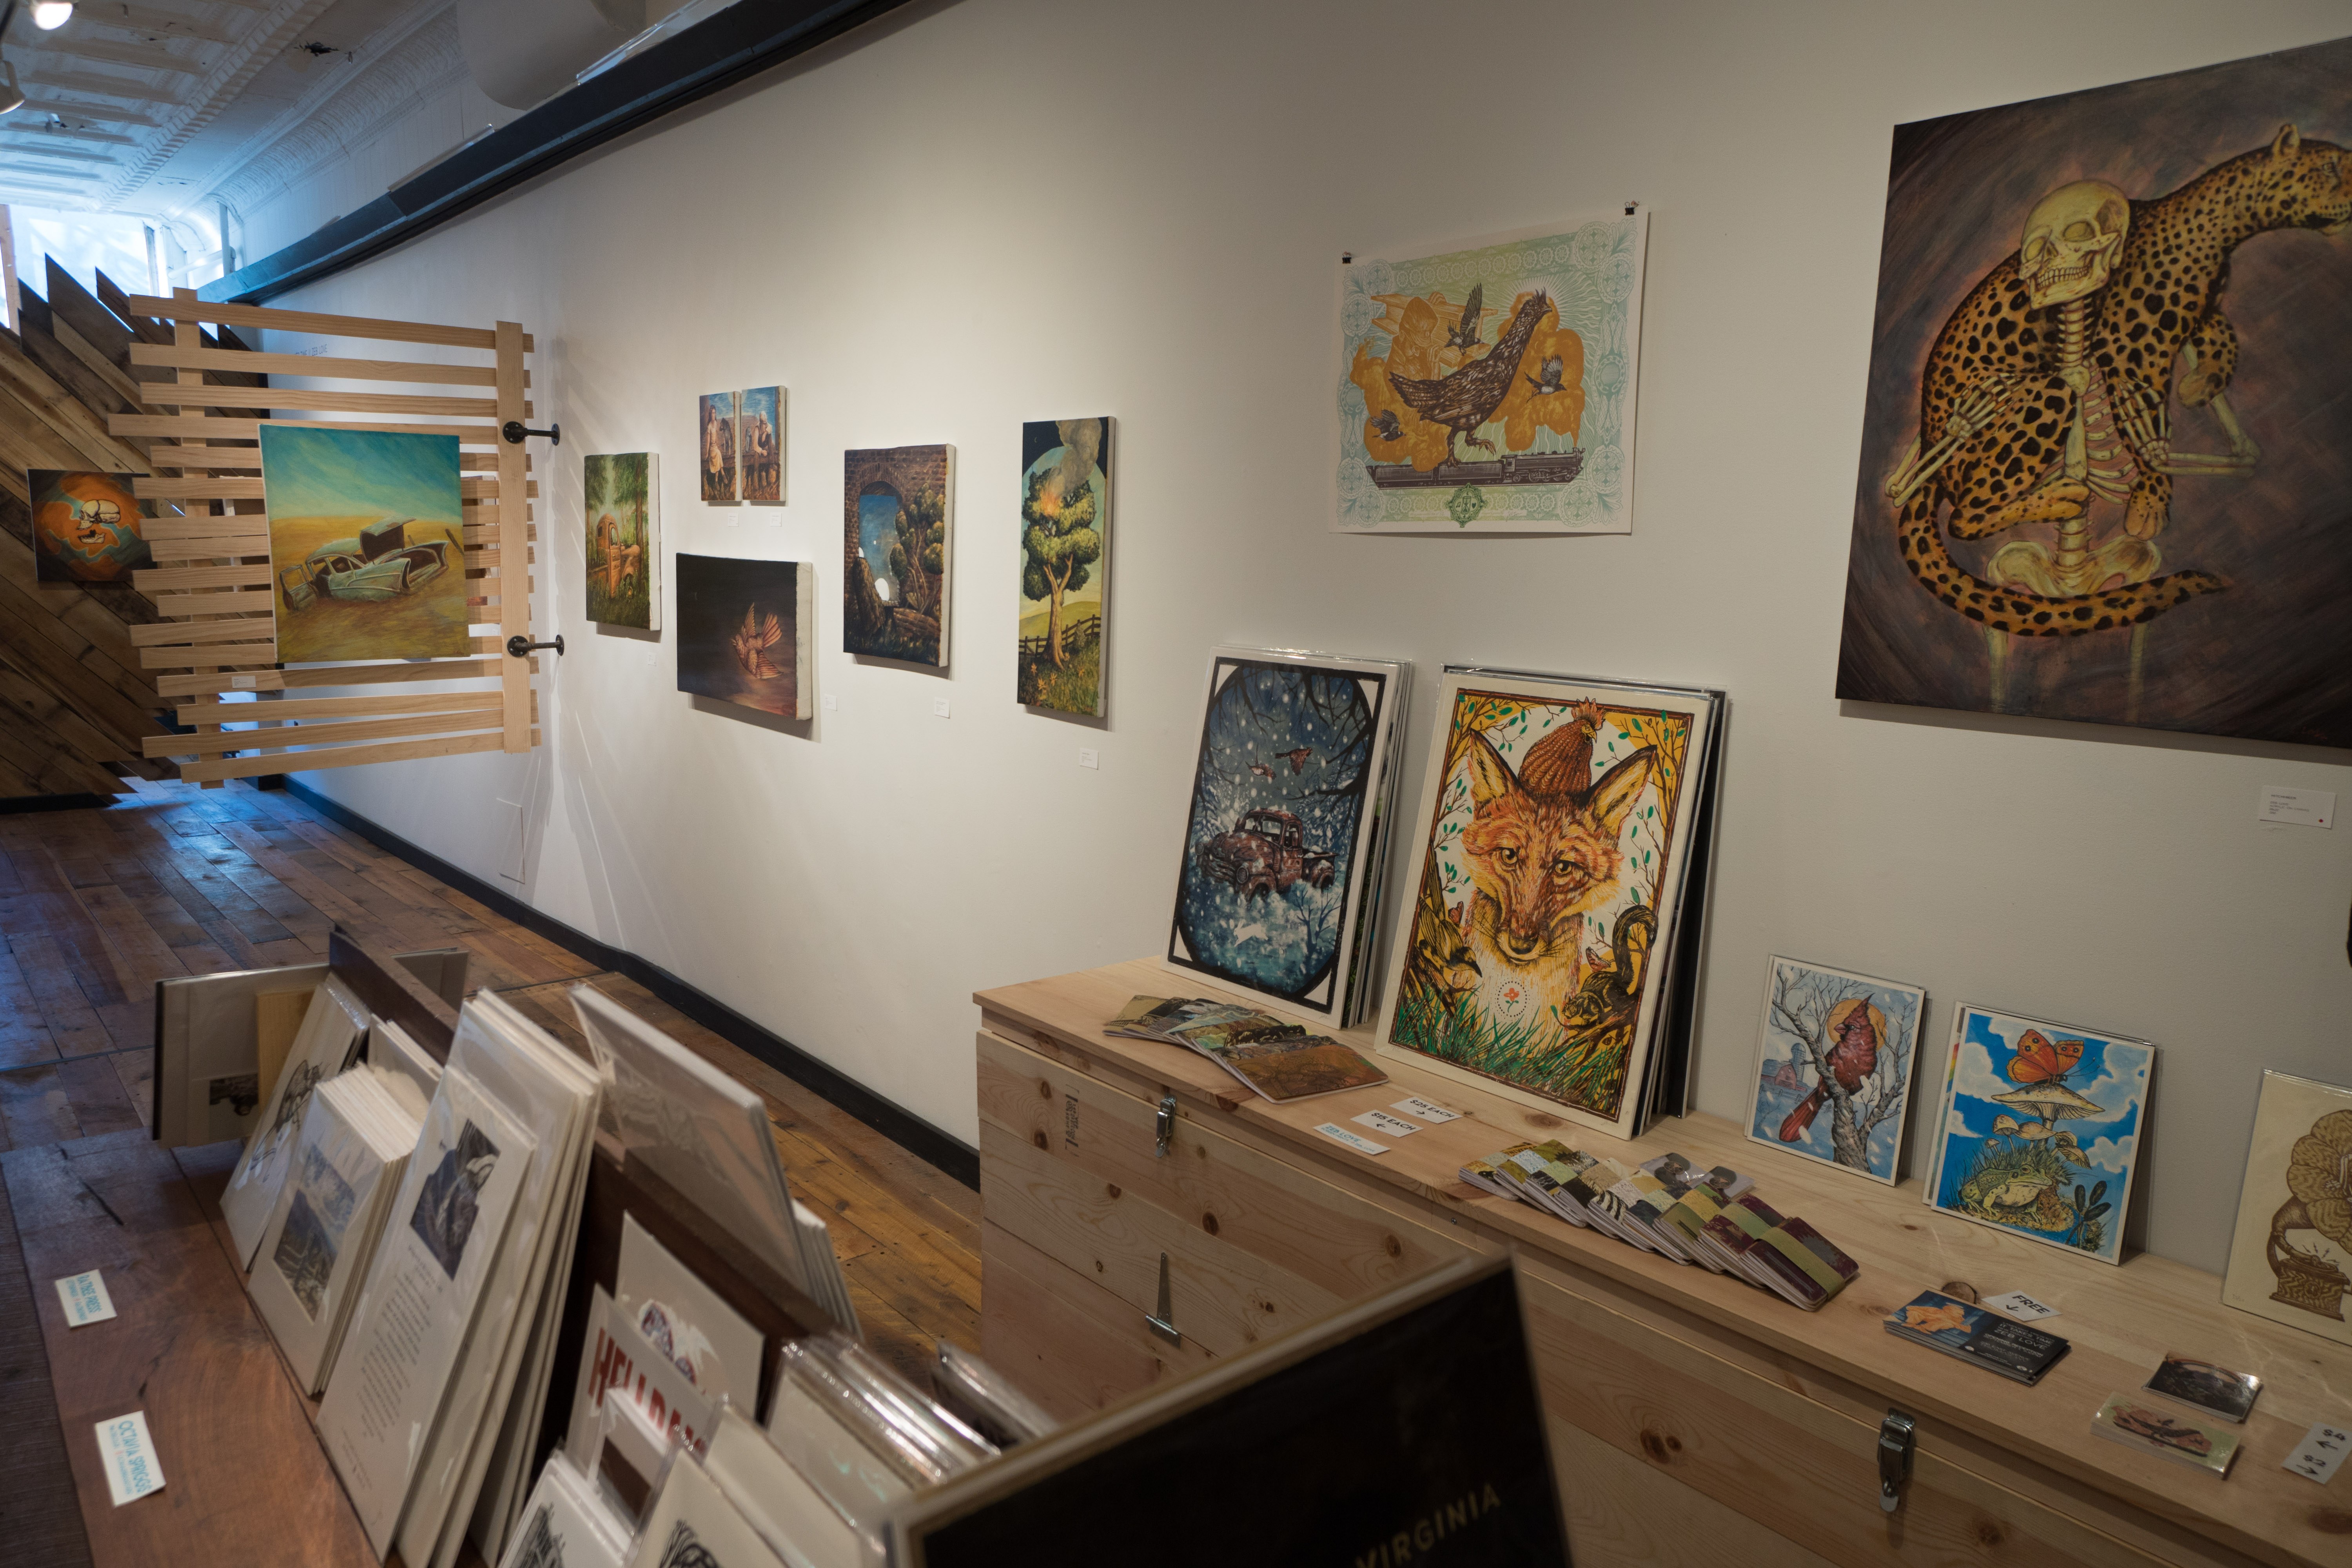 Thomas, West Virginia is home to Bloom, a contemporary art gallery.